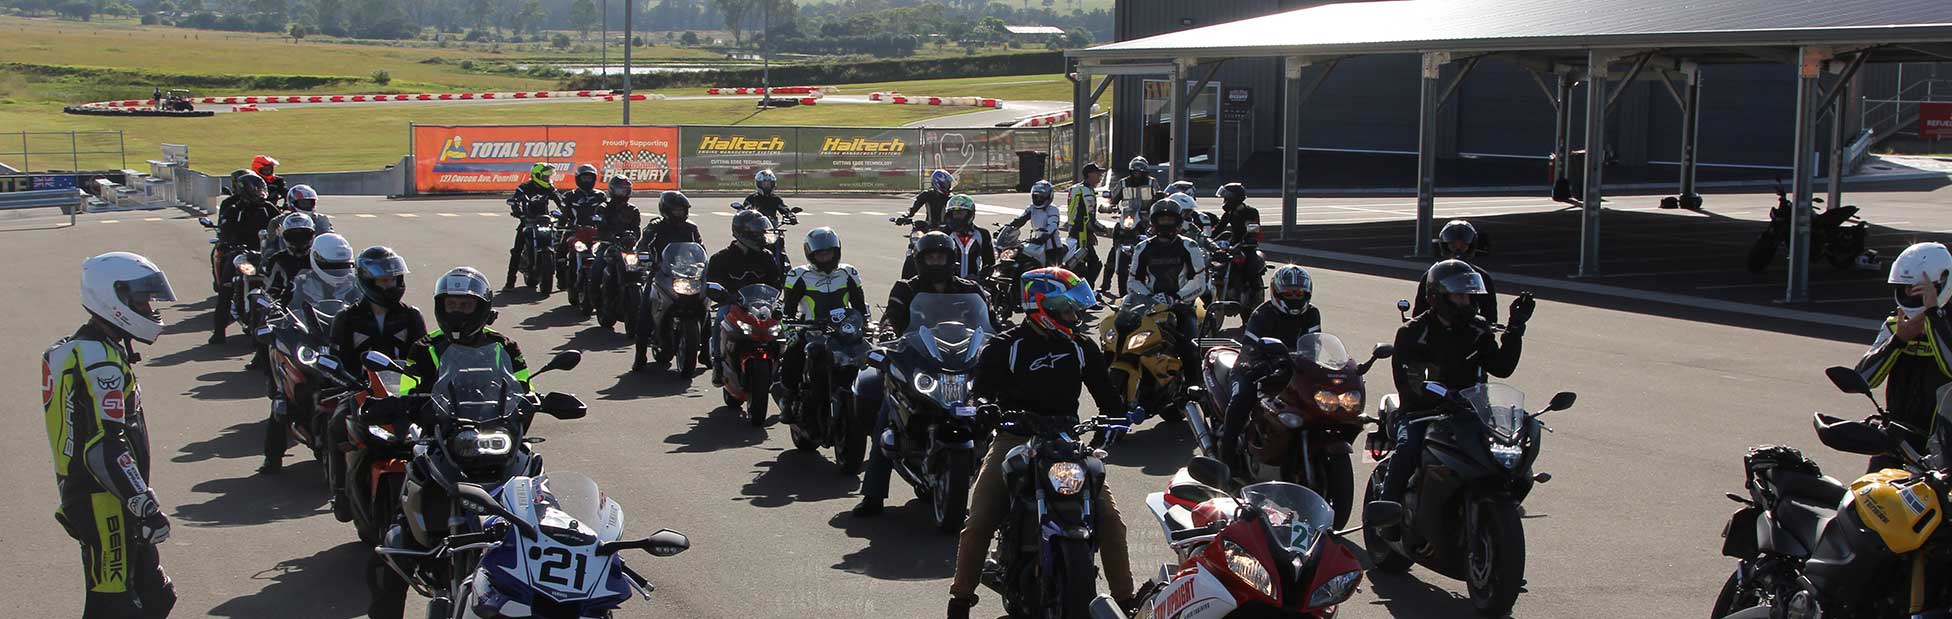 Group of motorcyclists on the racetrack